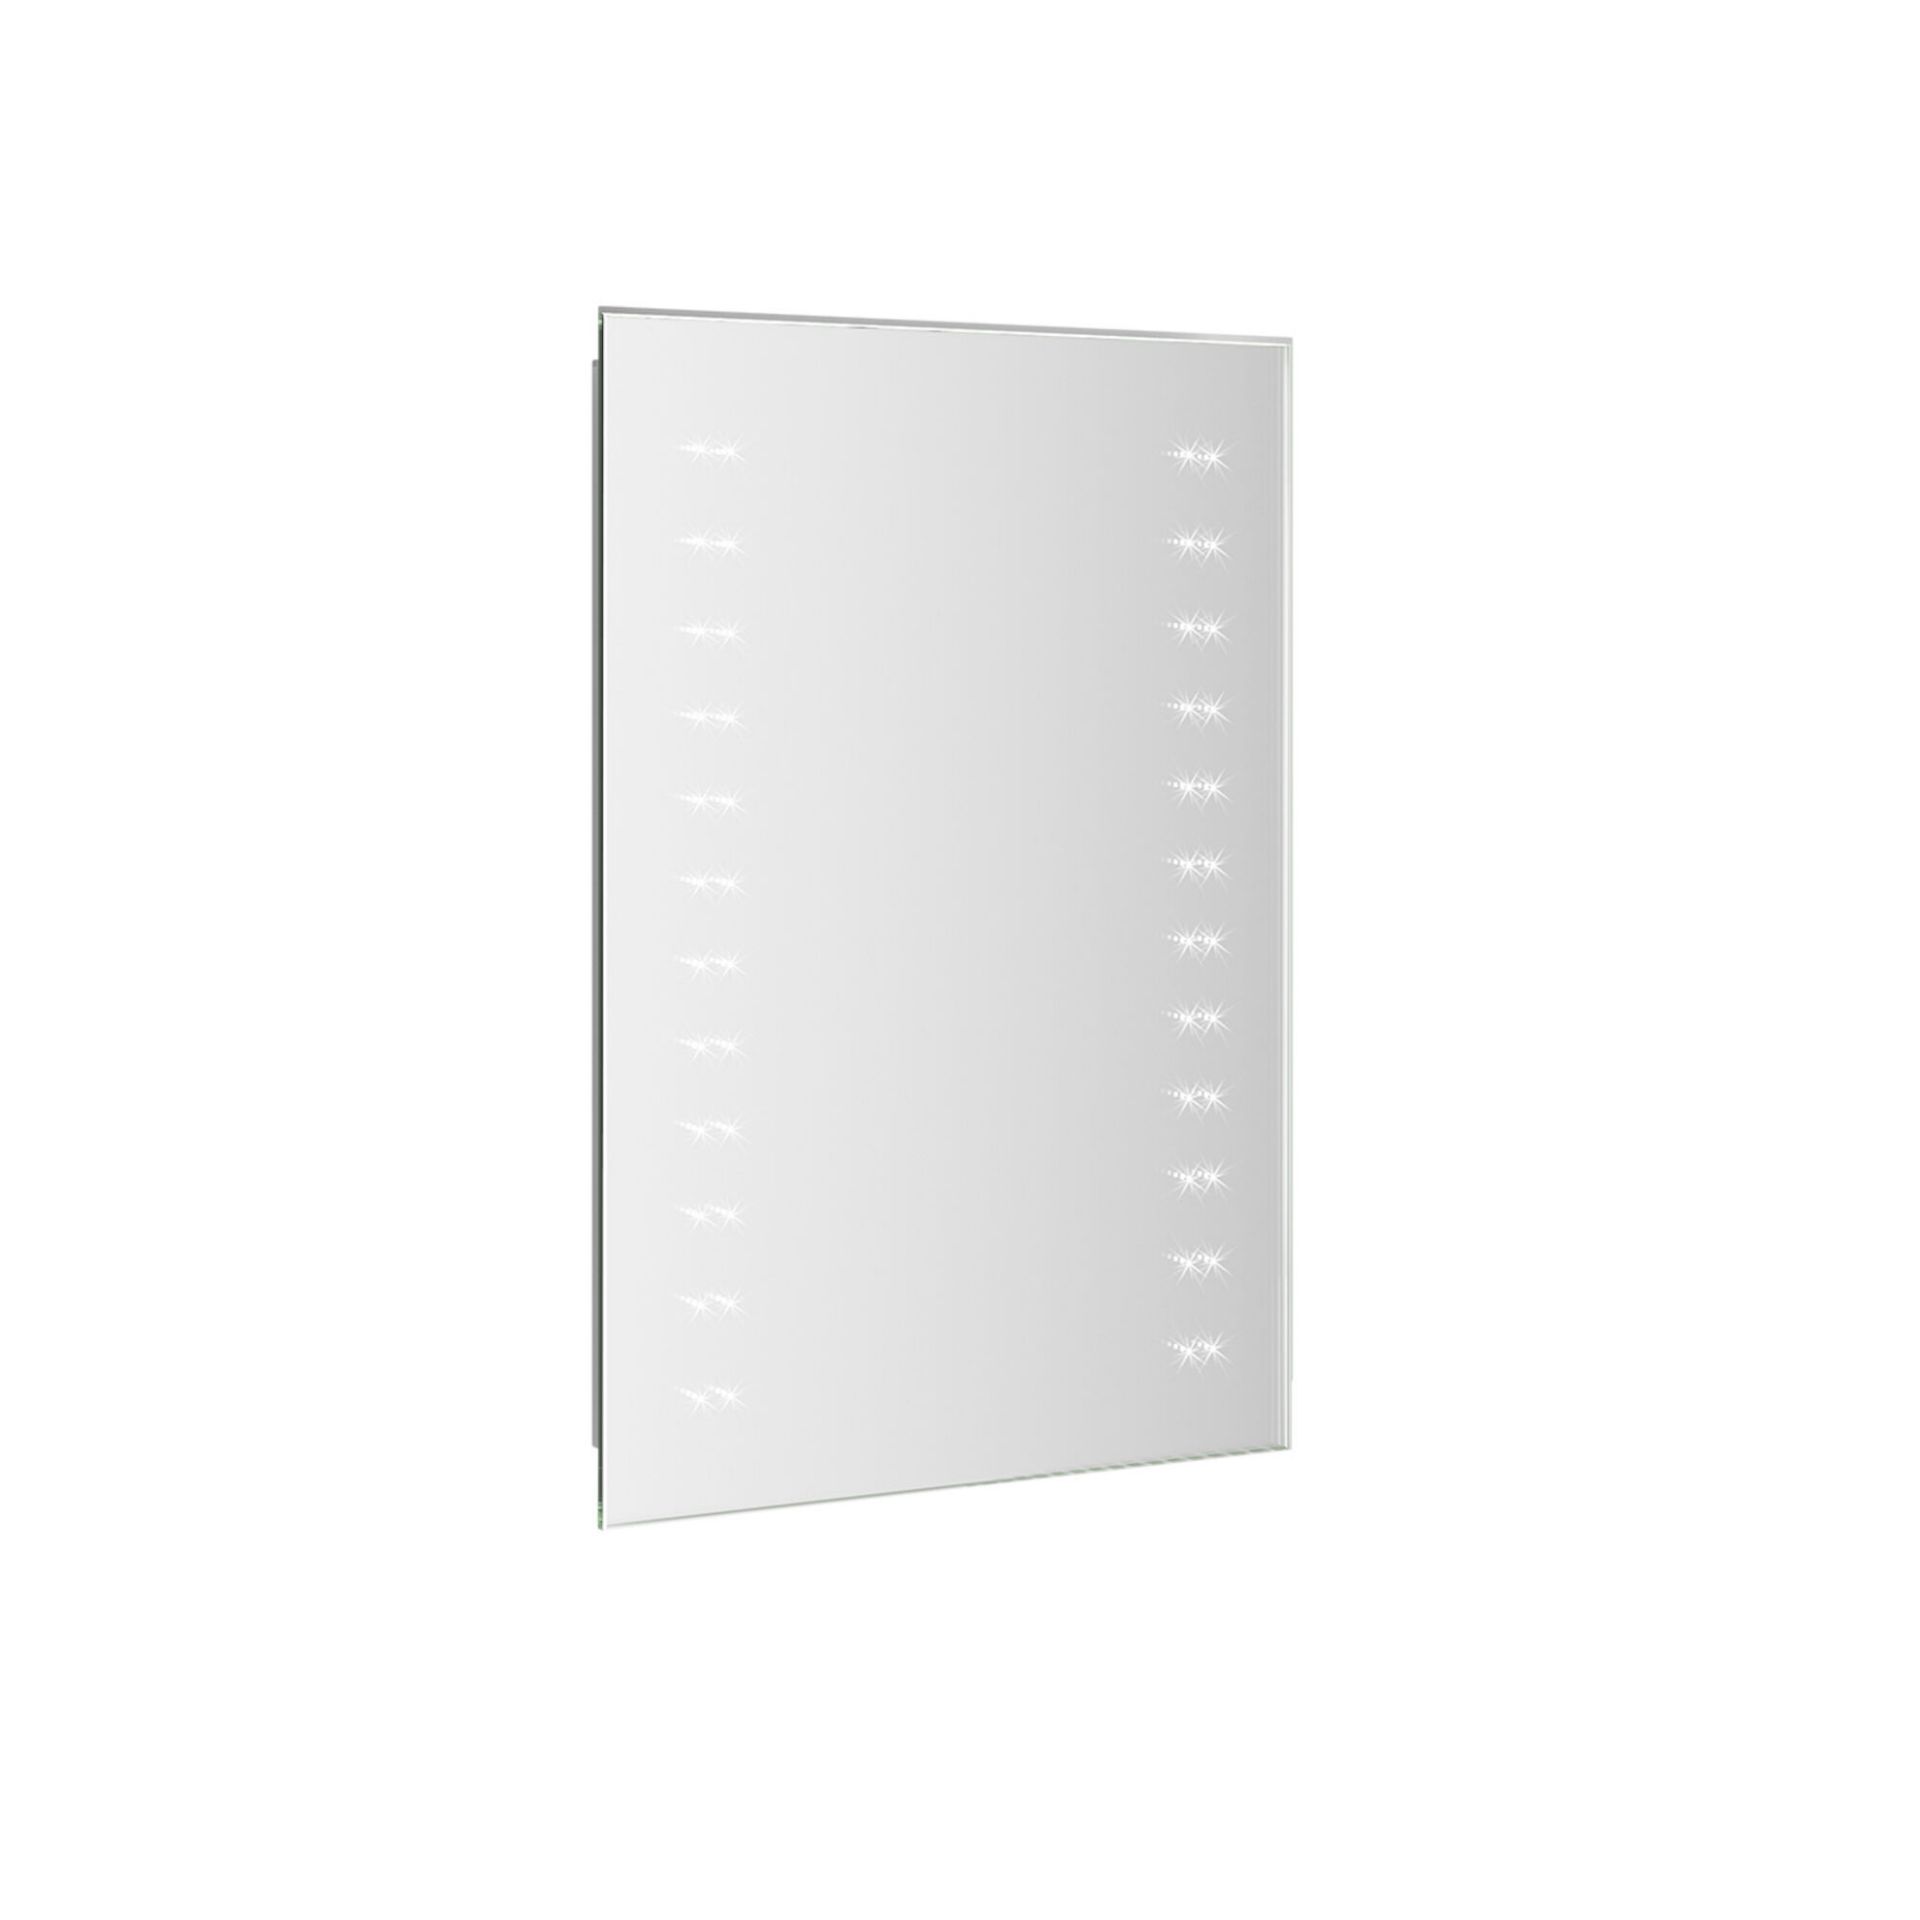 (CS170) 390x500mm Battery Operated LED Mirror. Energy saving controlled On / Off switch Convenient